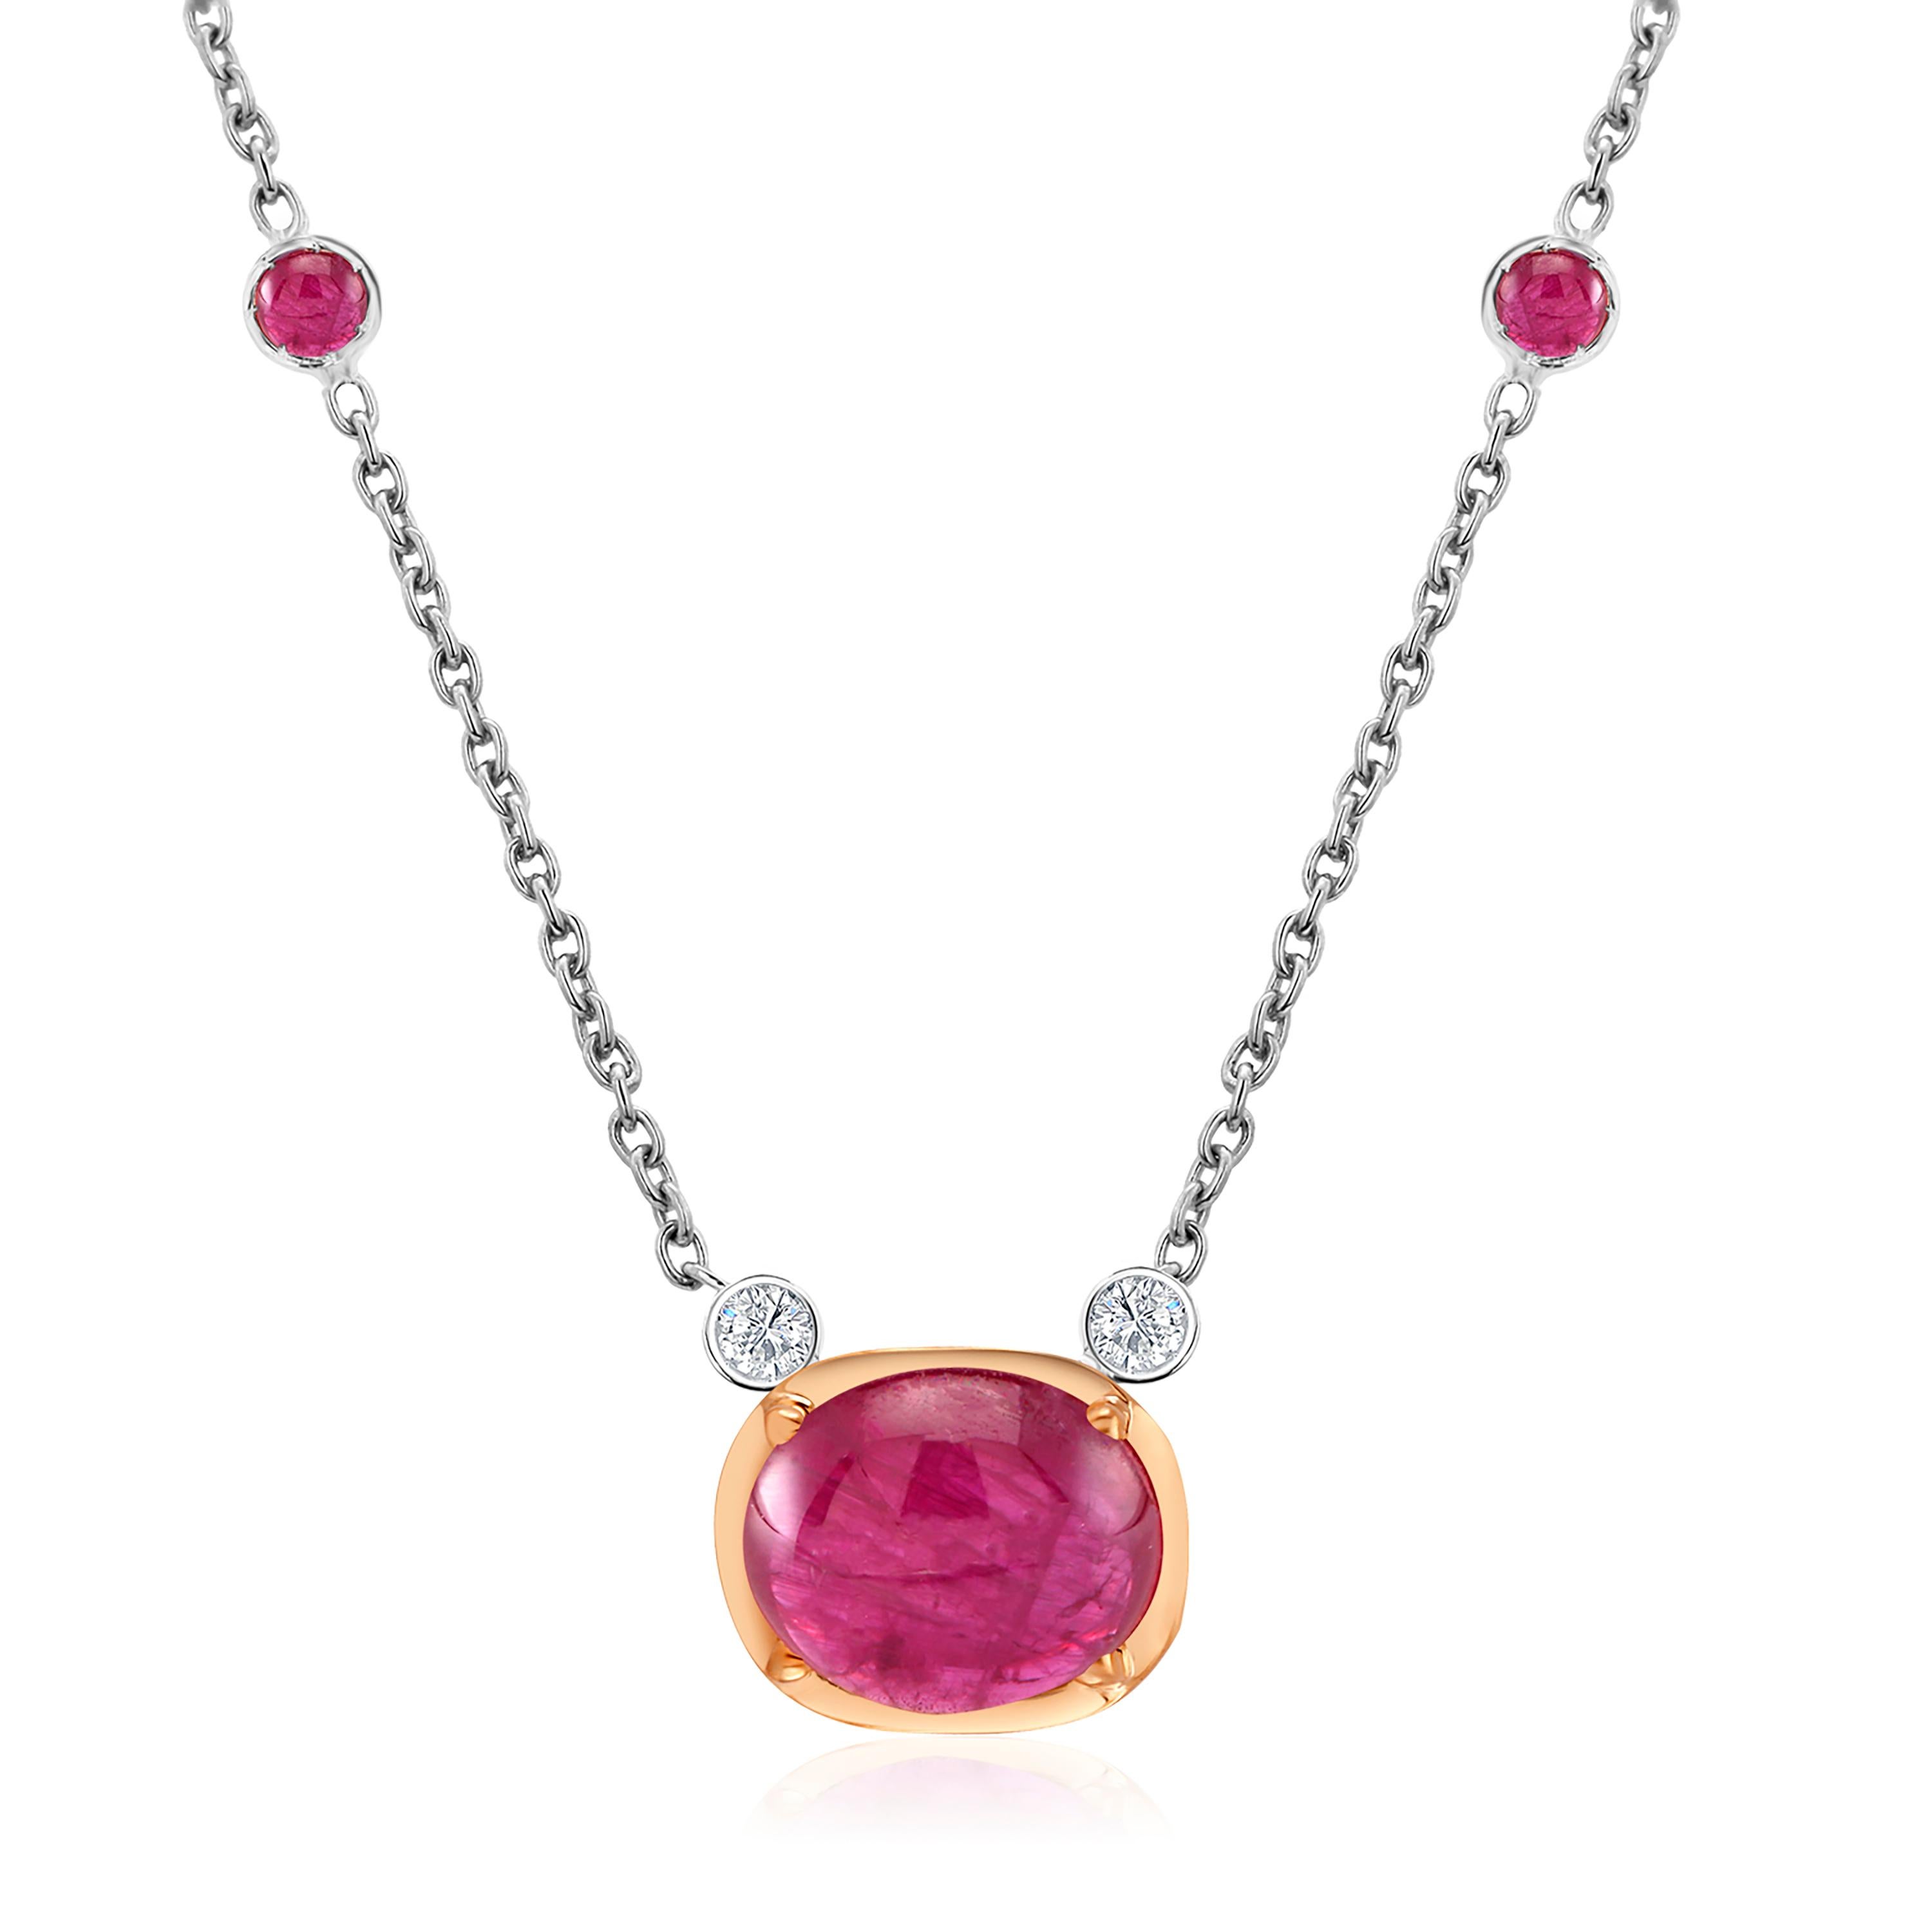 Cabochon Burma Ruby 3.54 Carat Diamonds 0.10 Carat Gold 16 Inch Necklace Pendant In New Condition For Sale In New York, NY